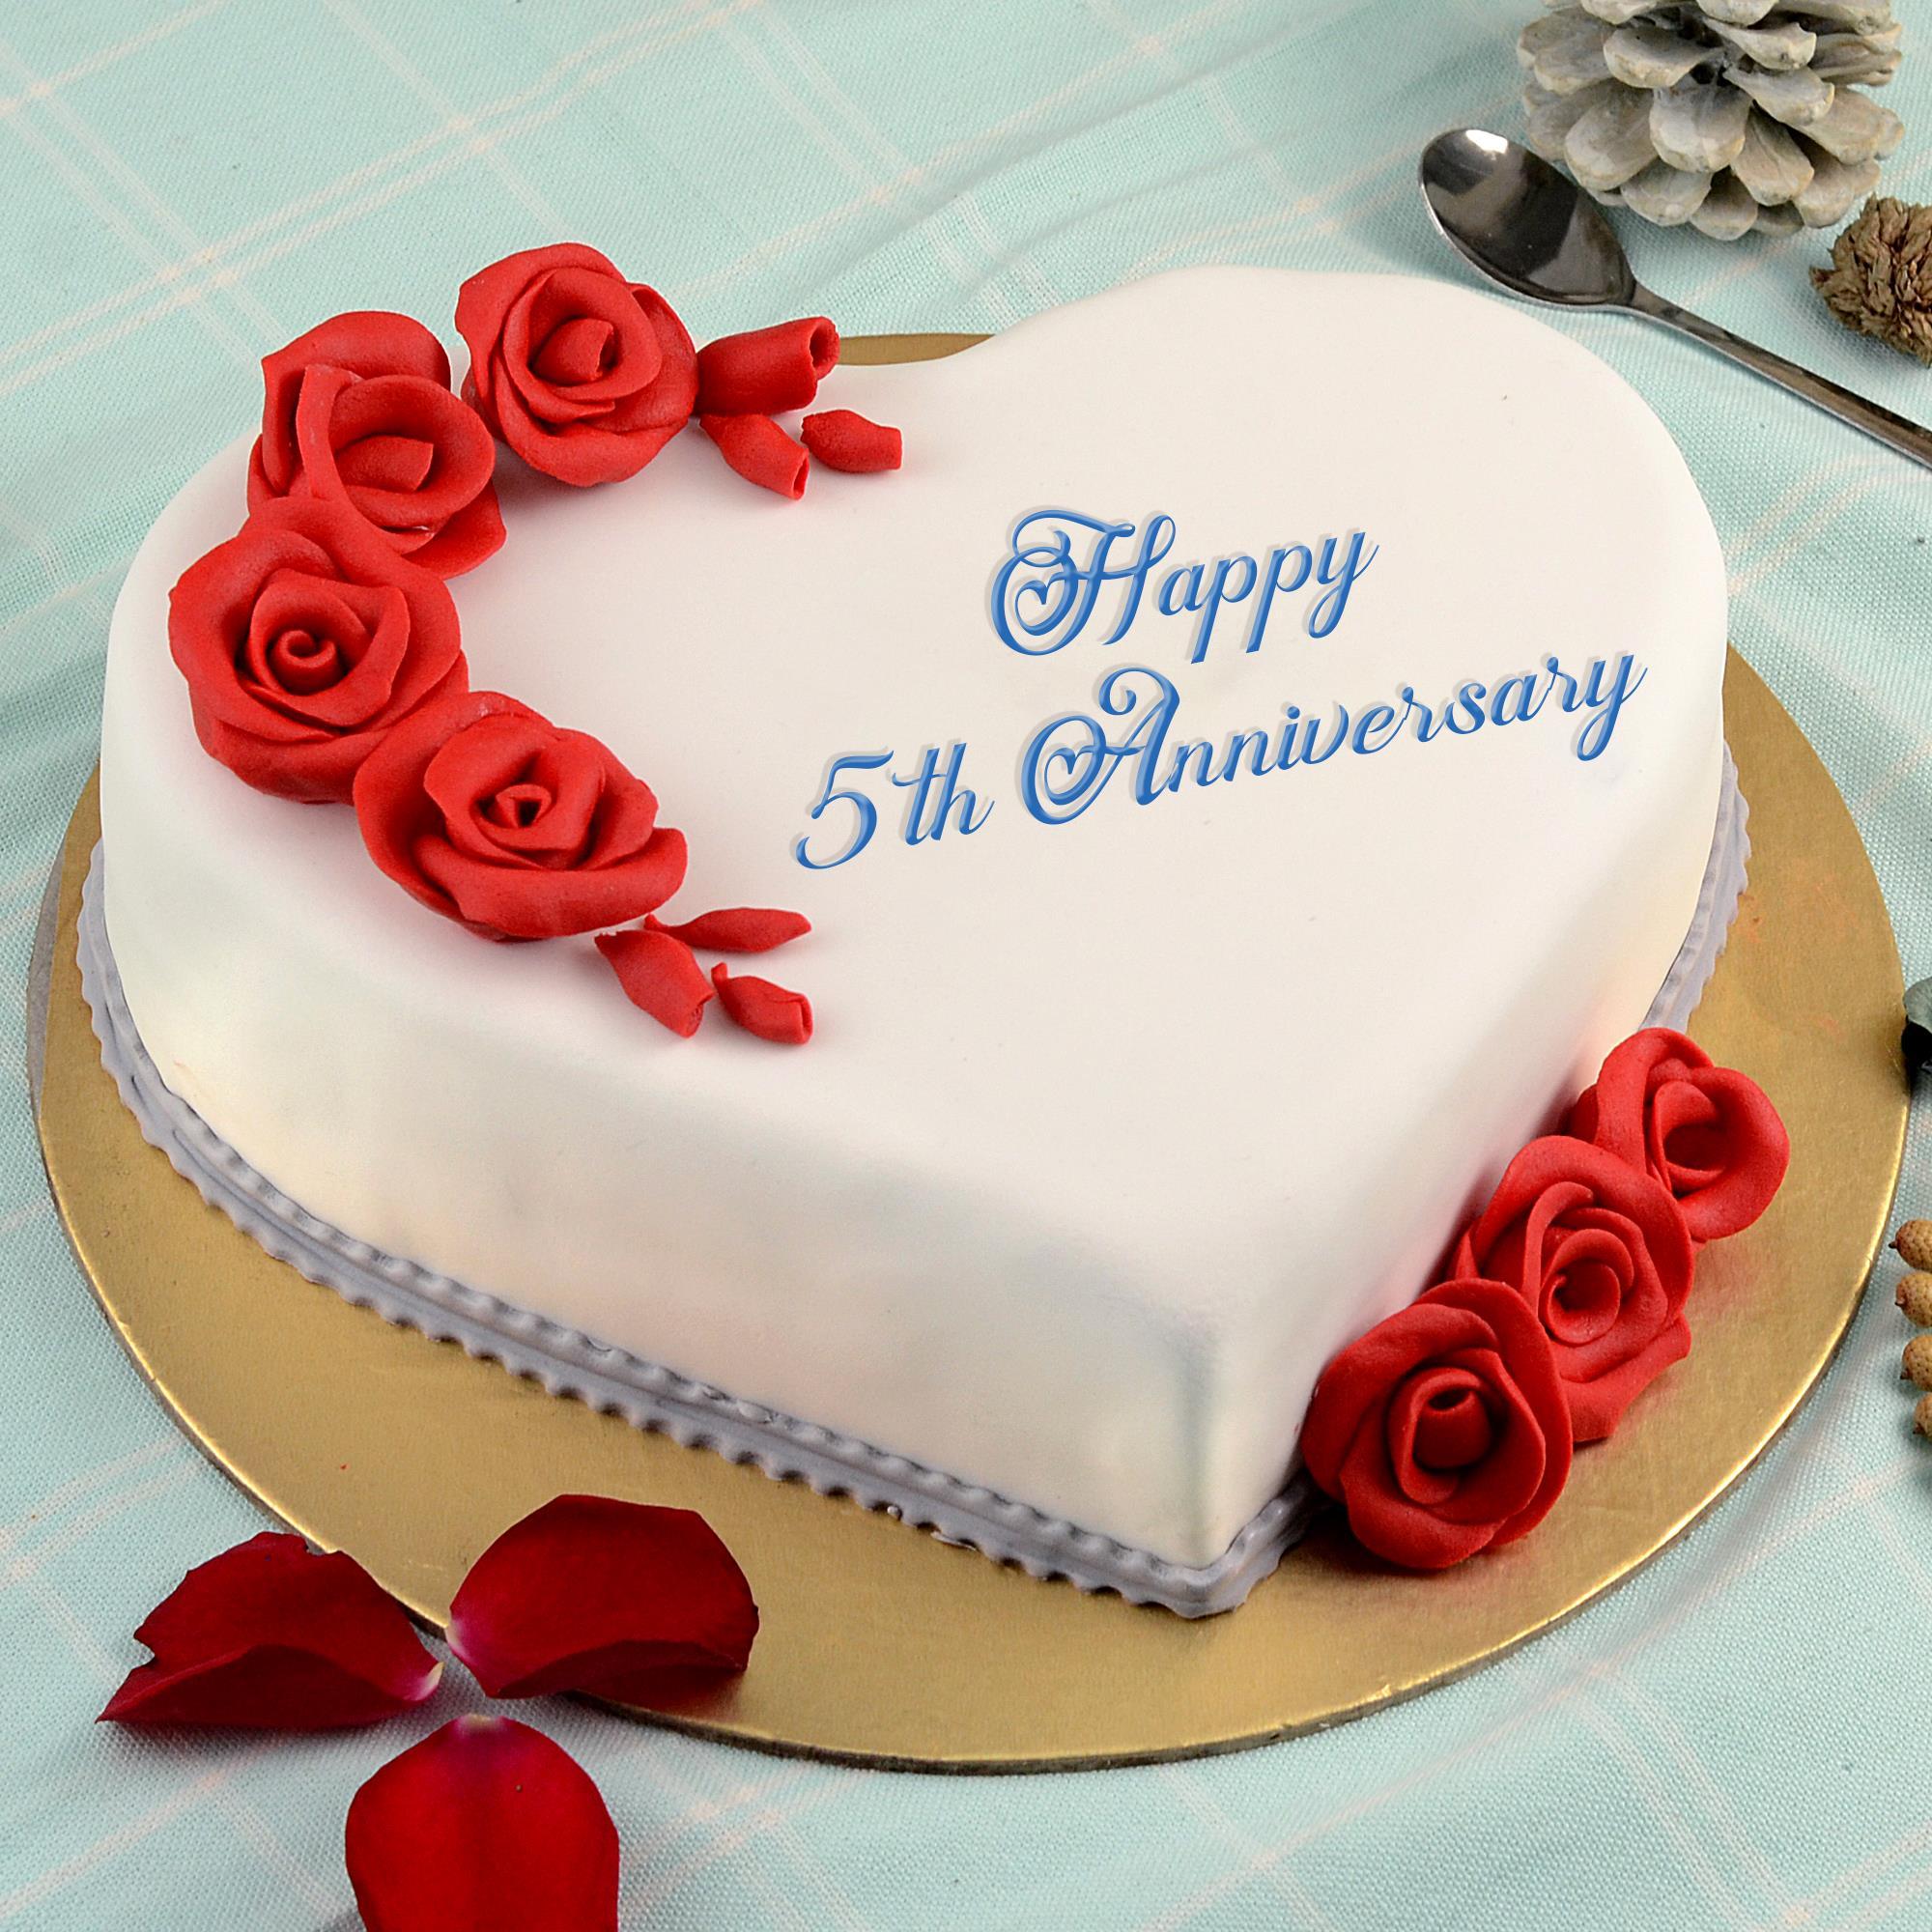 Wedding anniversary cake 5th Cut Out Stock Images & Pictures - Alamy